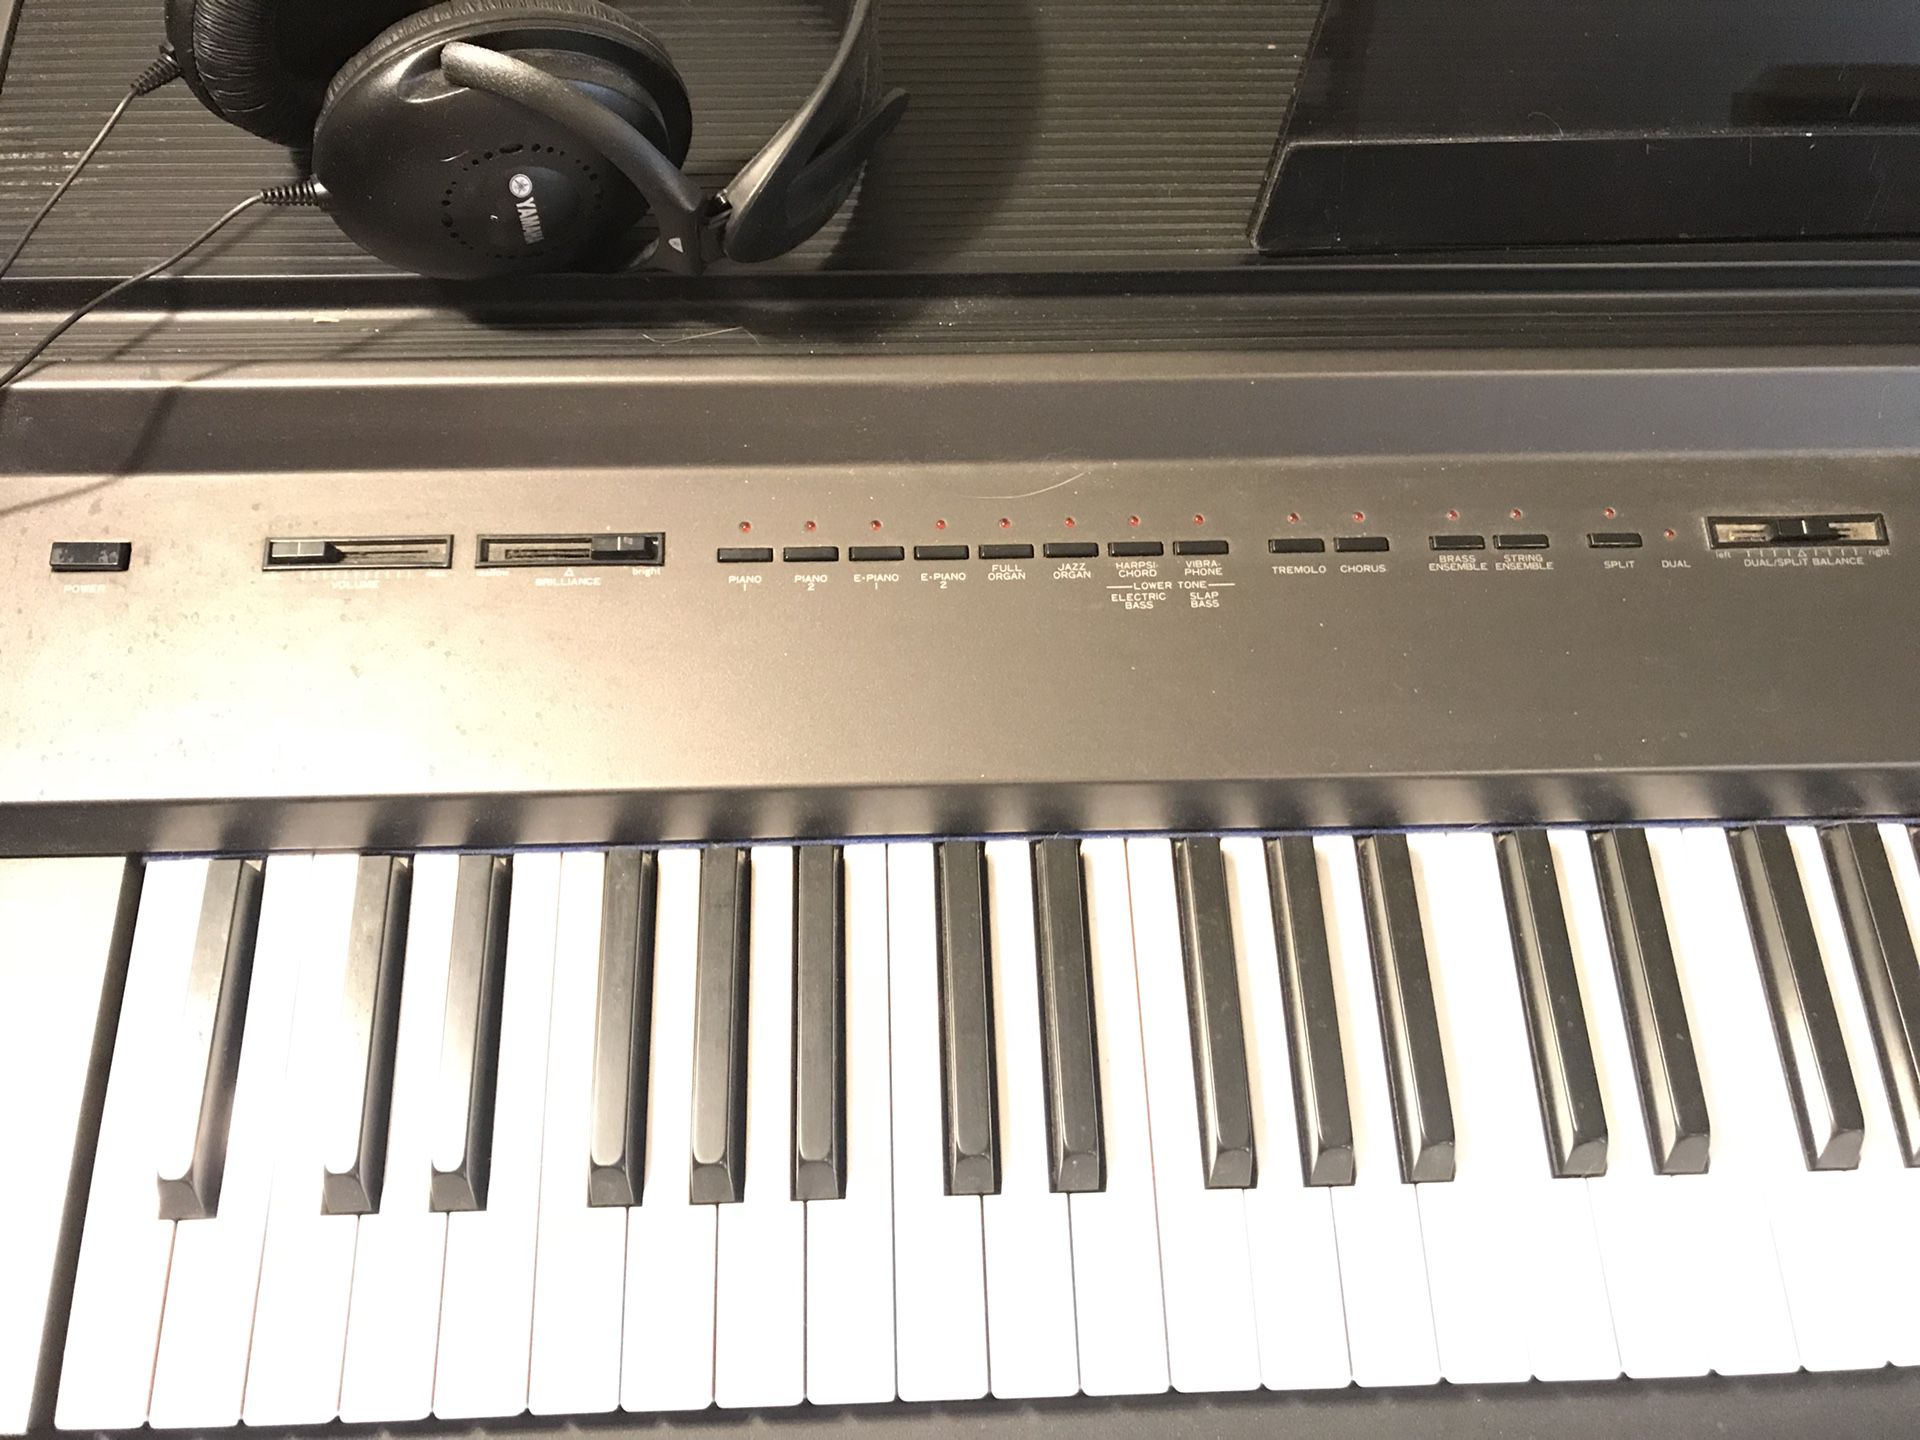 Kawai Digital Piano P351 With Bench For Sale In Denver Co Offerup